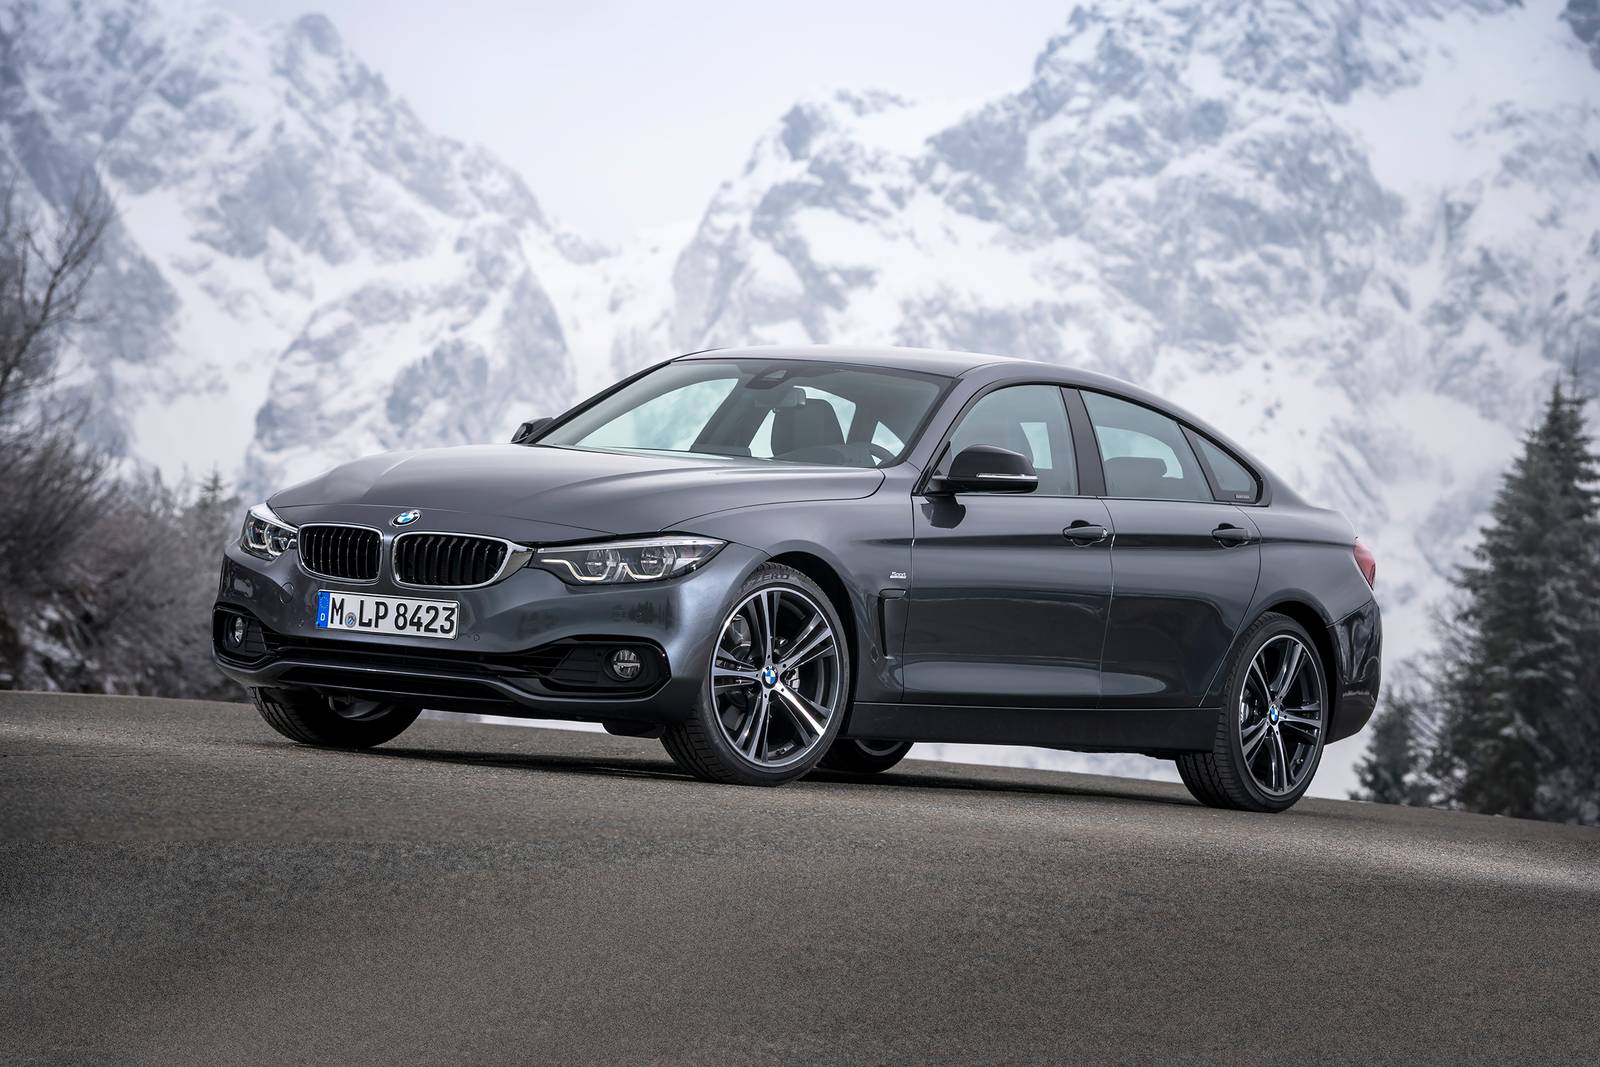 2020 BMW 4 Series Gran Coupe Review & Ratings | Edmunds